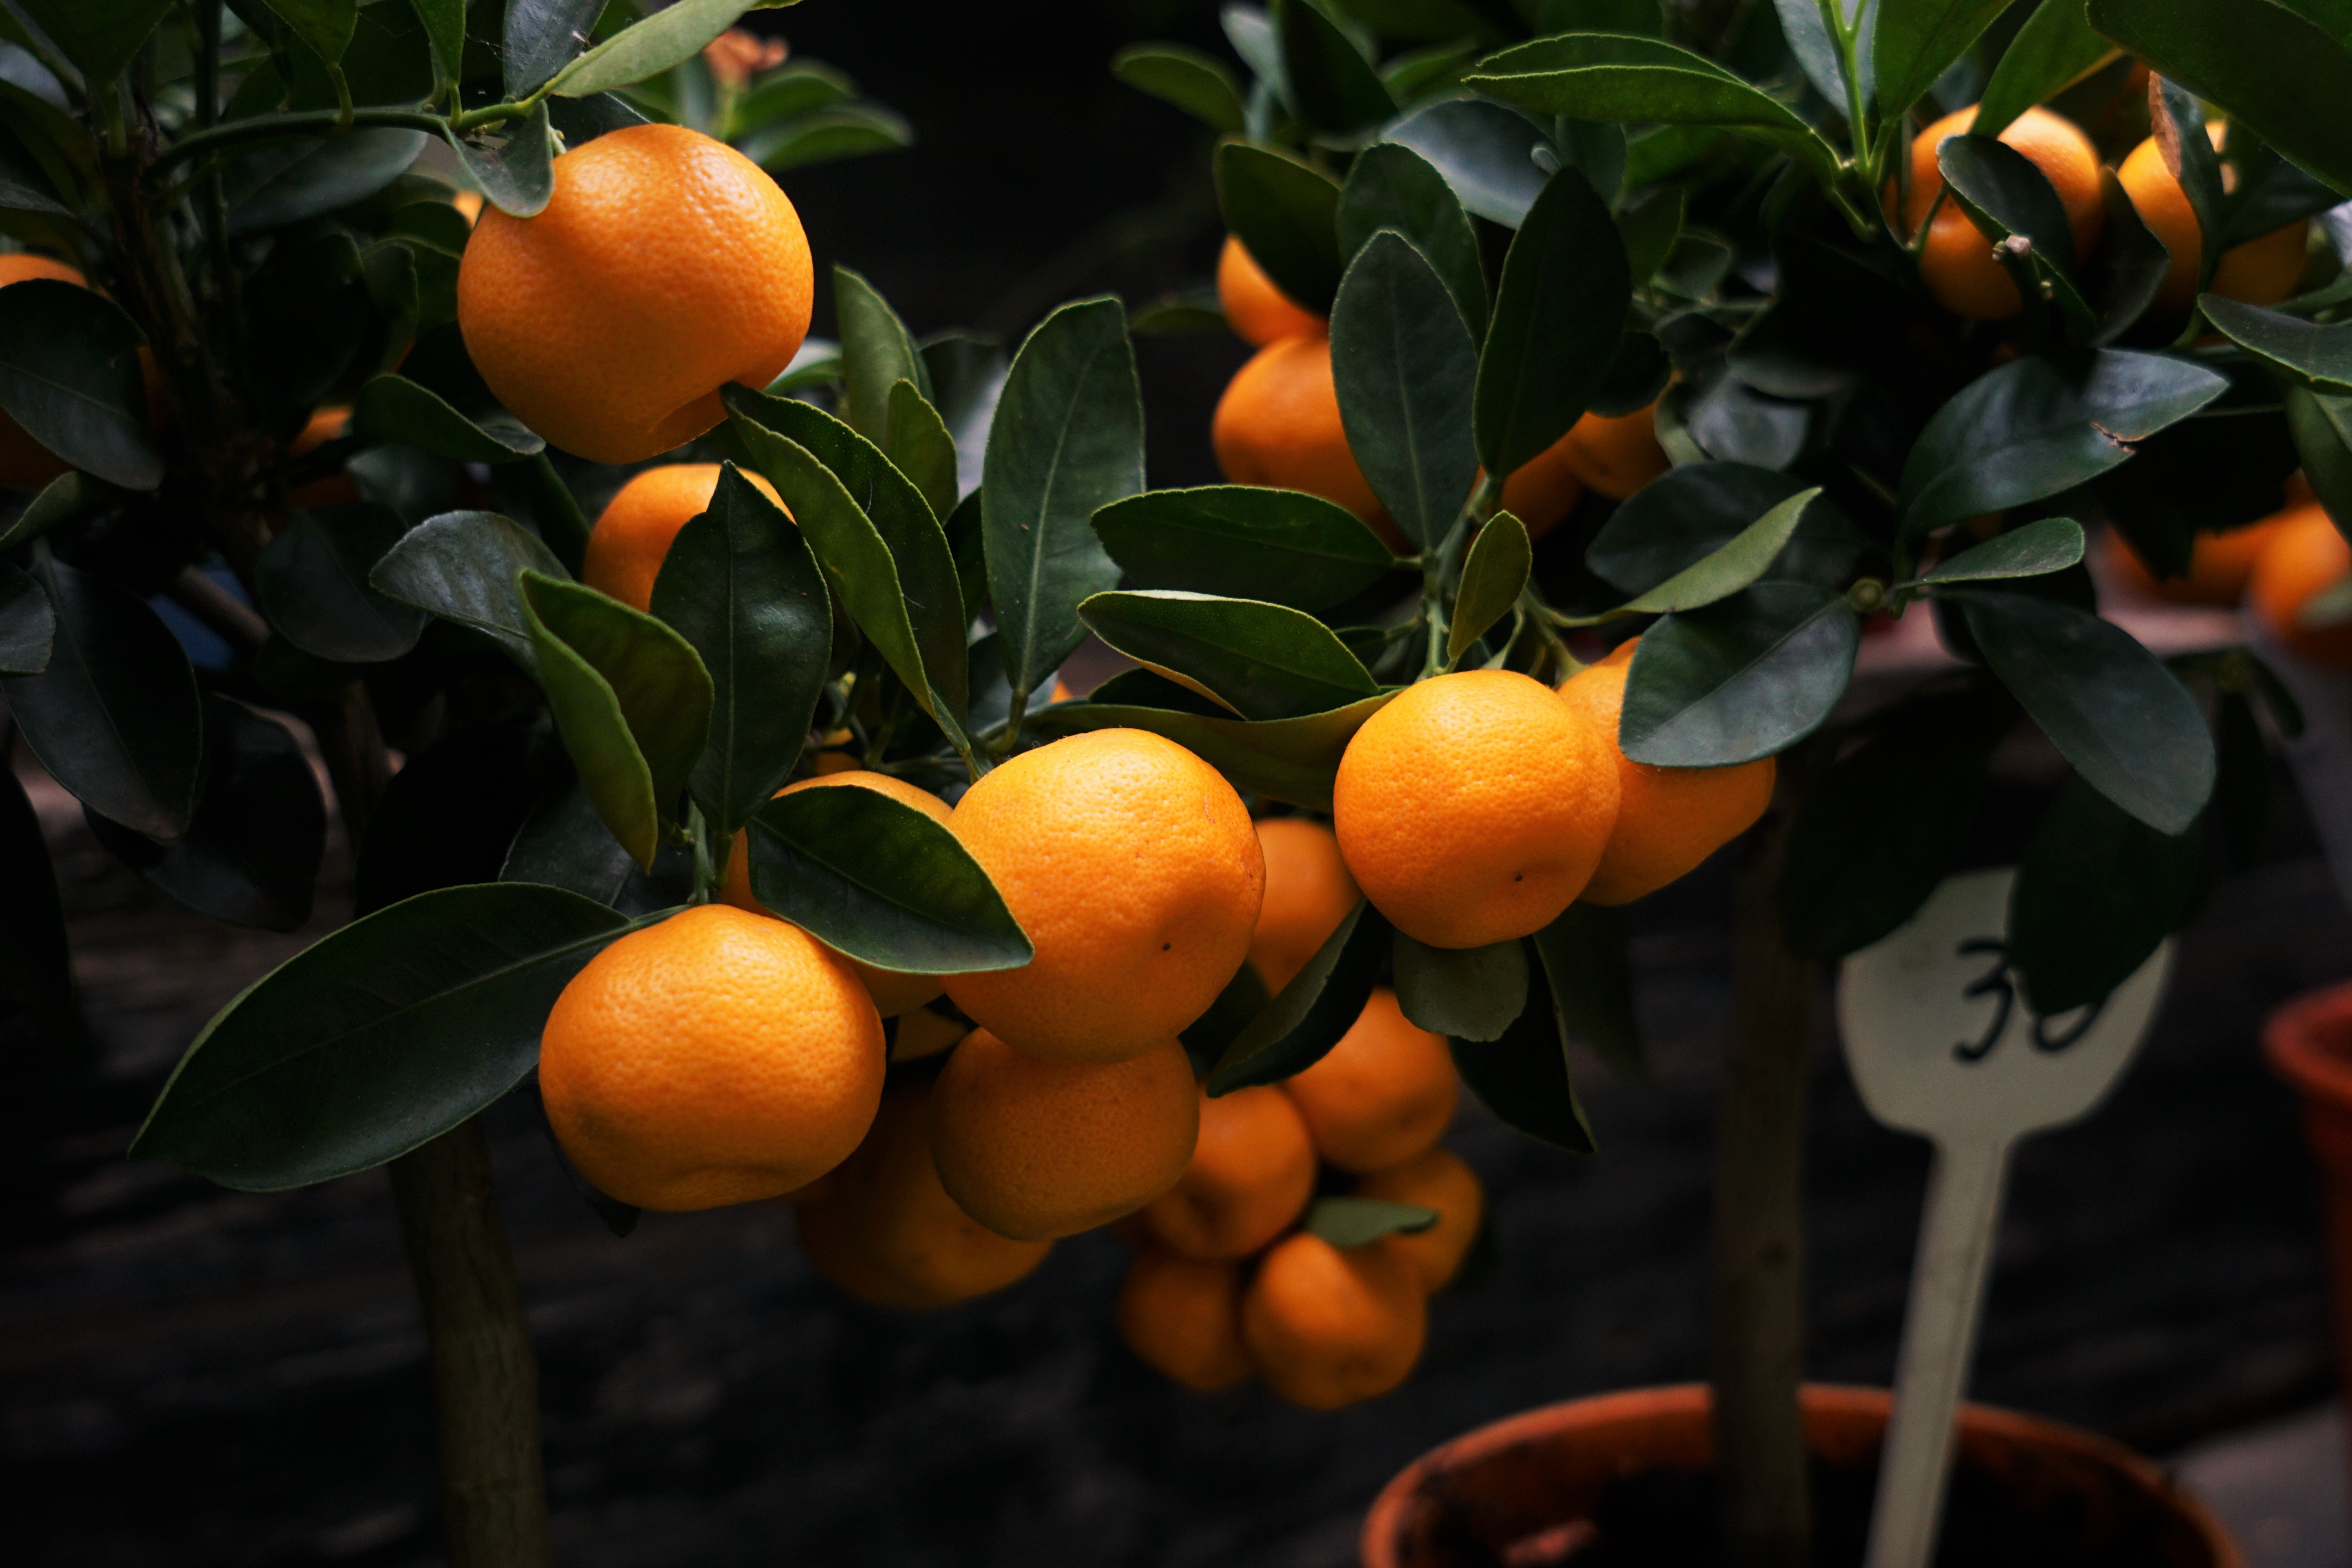 76244 download wallpaper fruits, food, branches, citrus, manadirins, manadrini screensavers and pictures for free